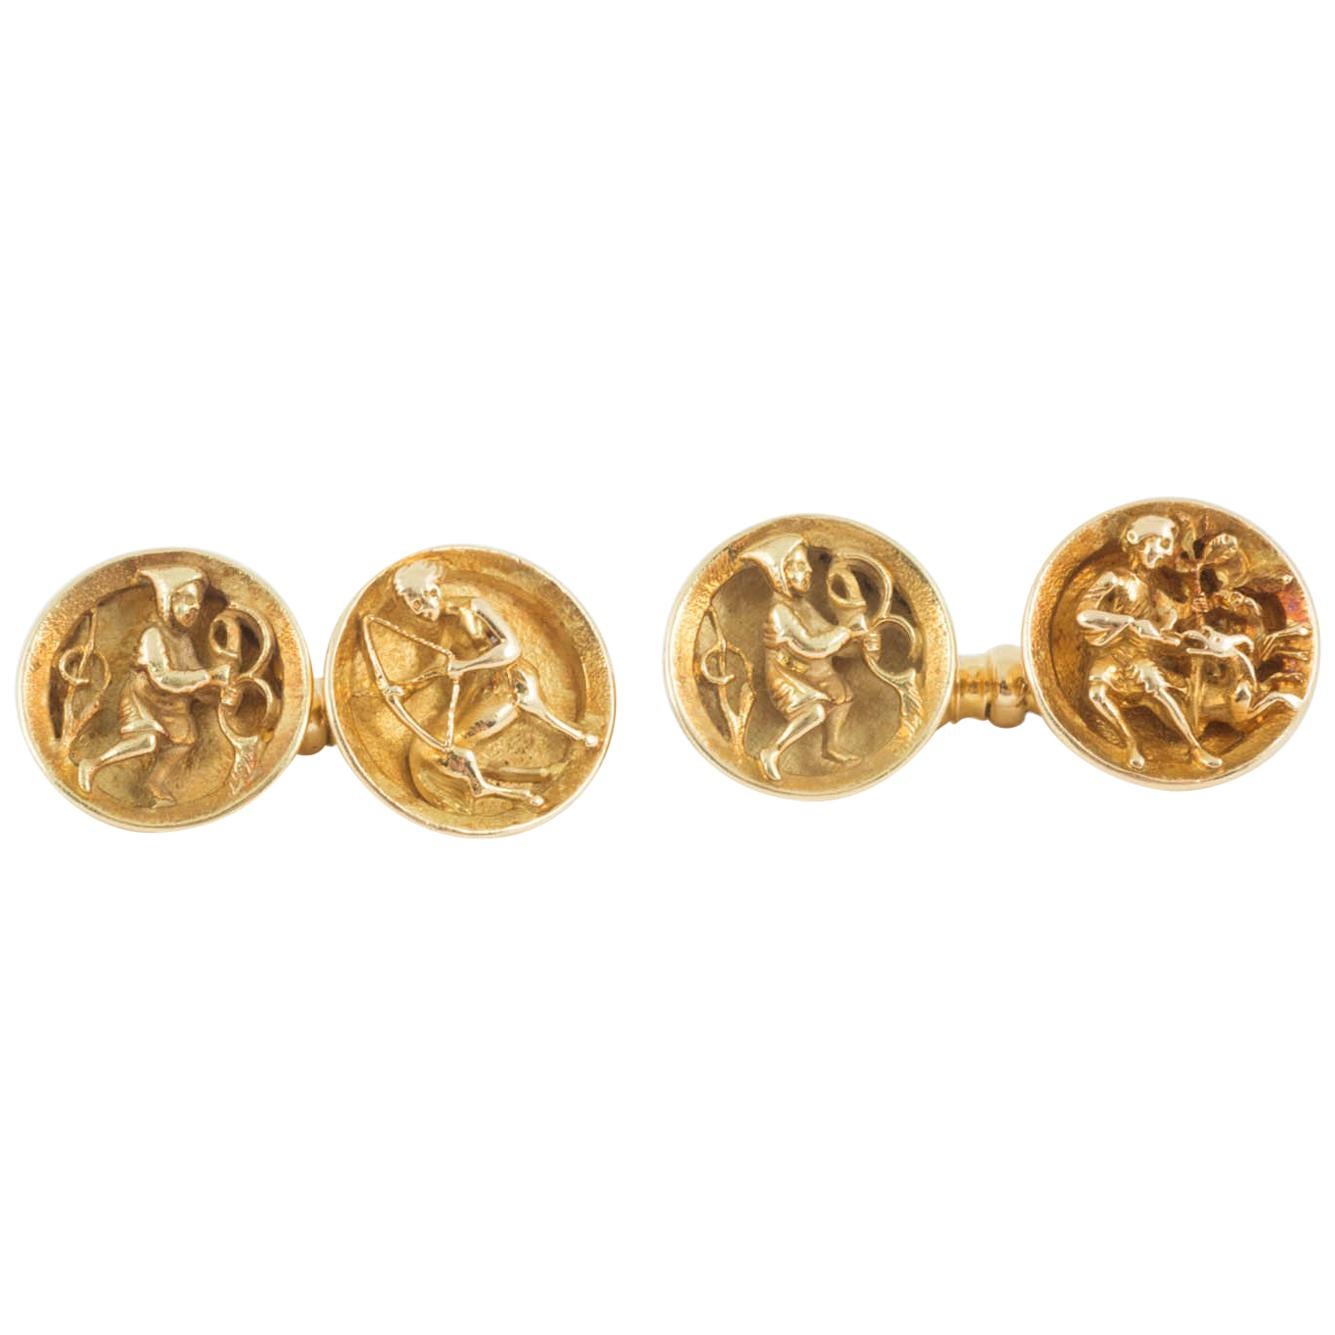 Cufflinks 18 Karat Gold Concave with Theological Scenes, Jules Wiese Paris, 1870 For Sale